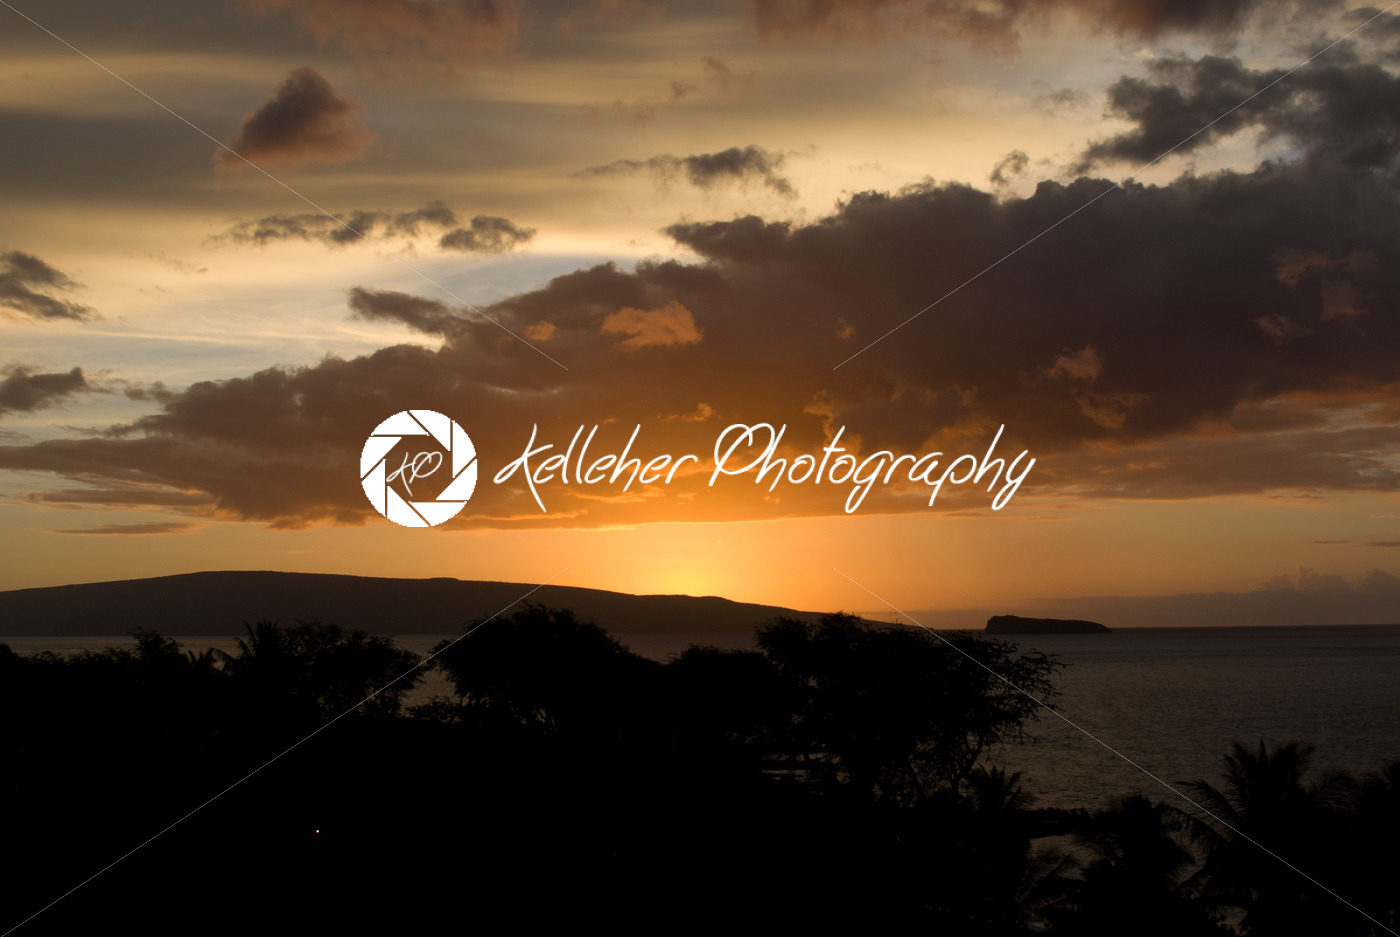 Tropical Sunset over beach in Maui Hawaii - Kelleher Photography Store